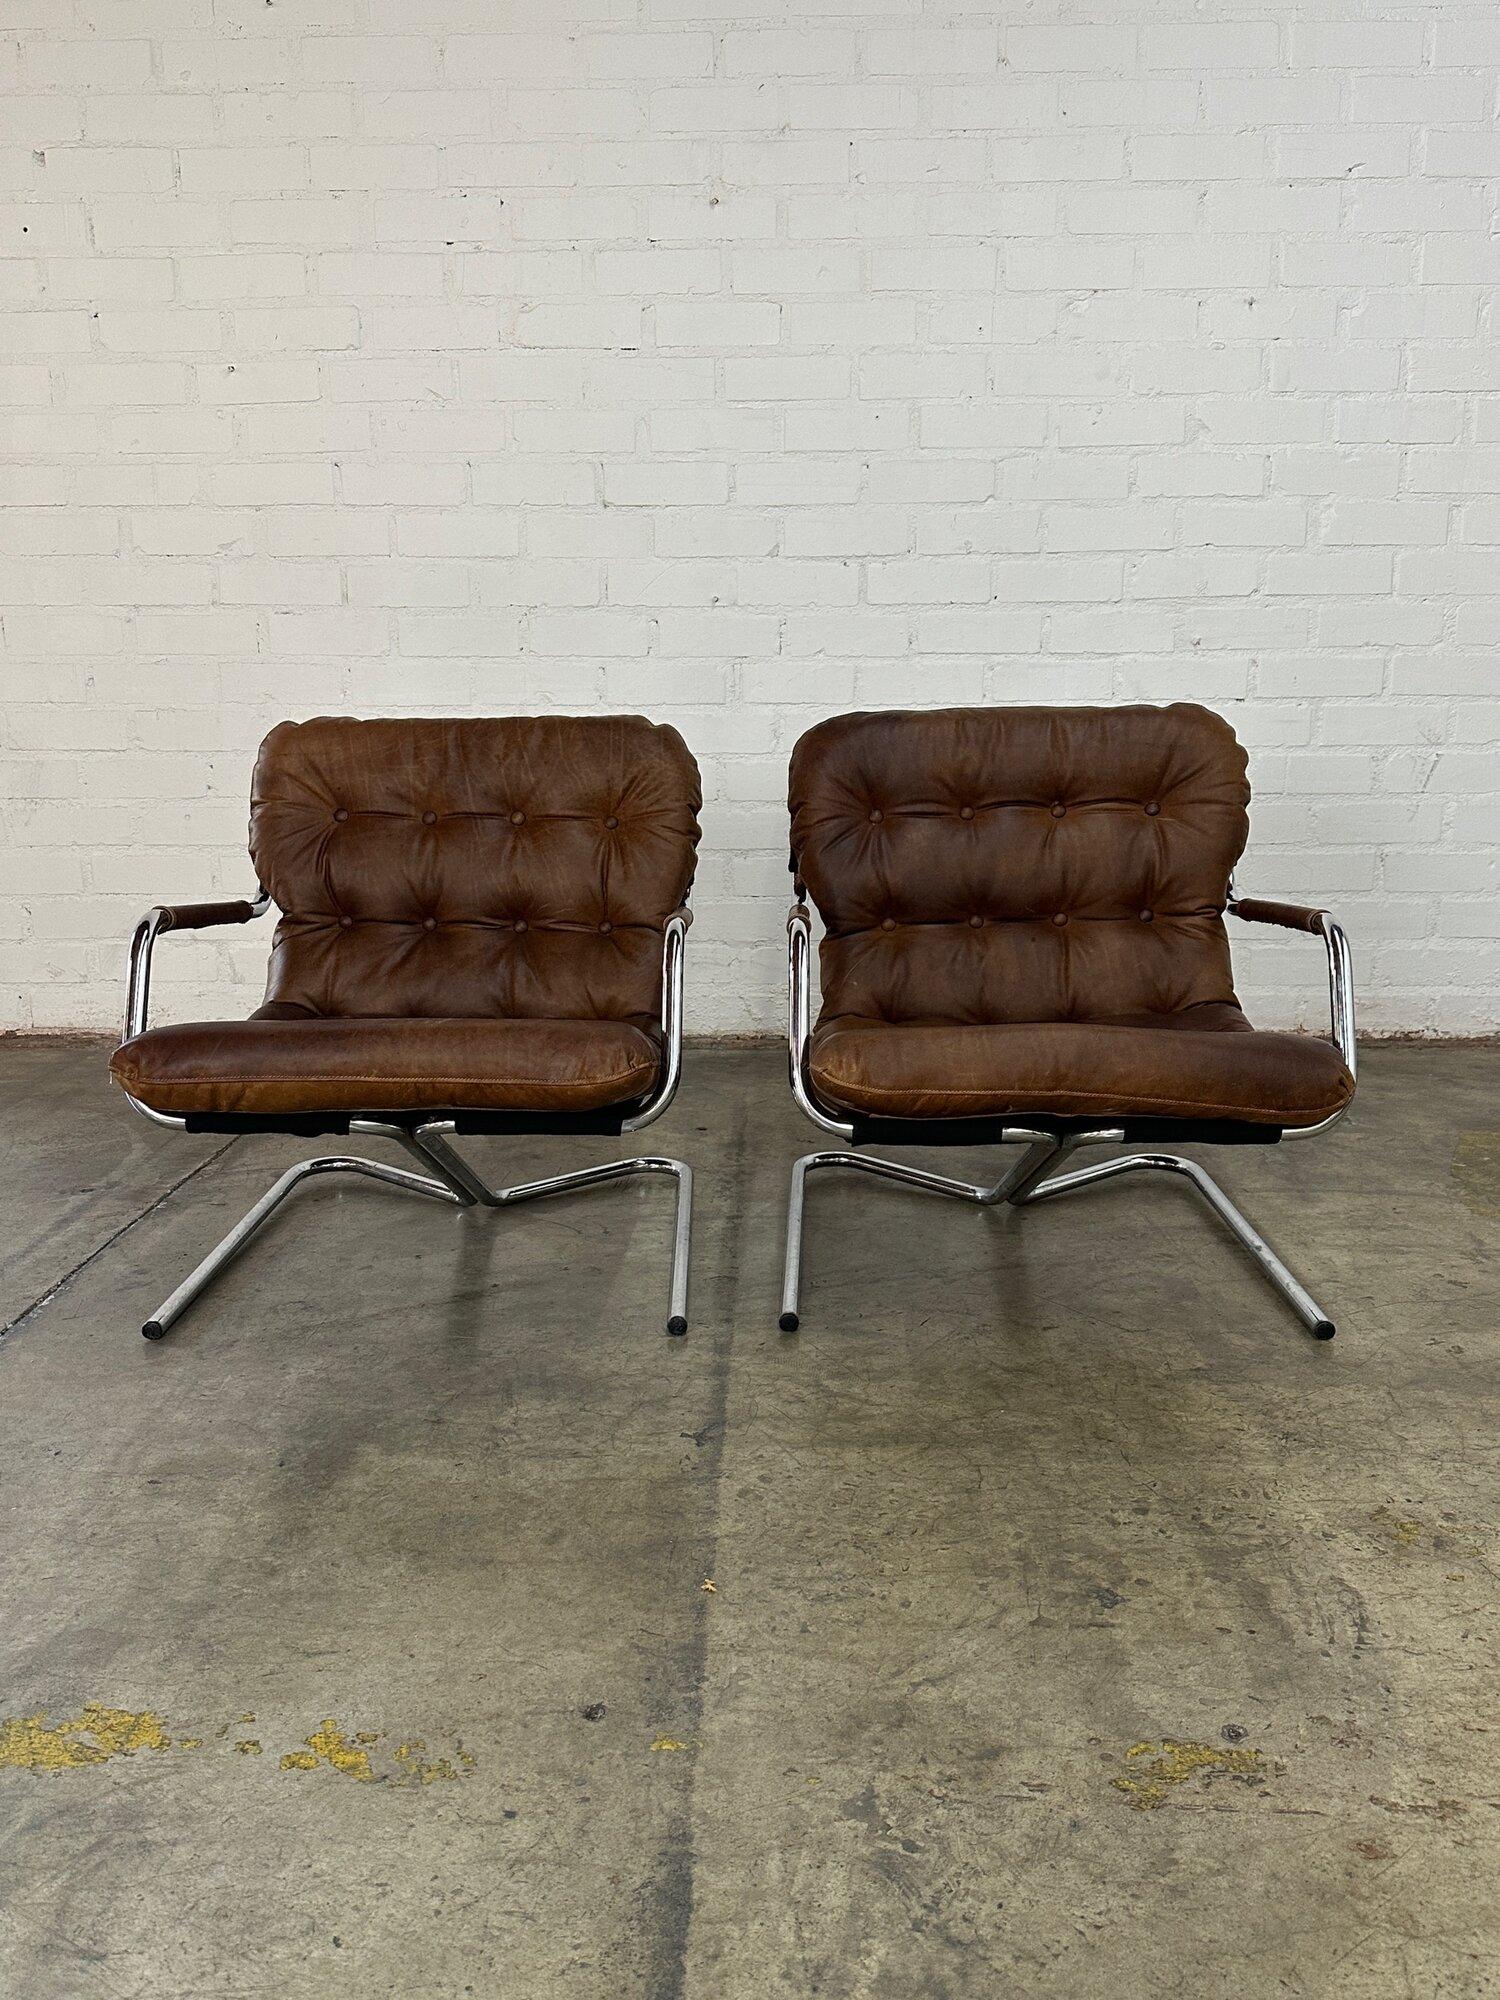 Cantilevered Italian Lounge chairs - sold separately 11